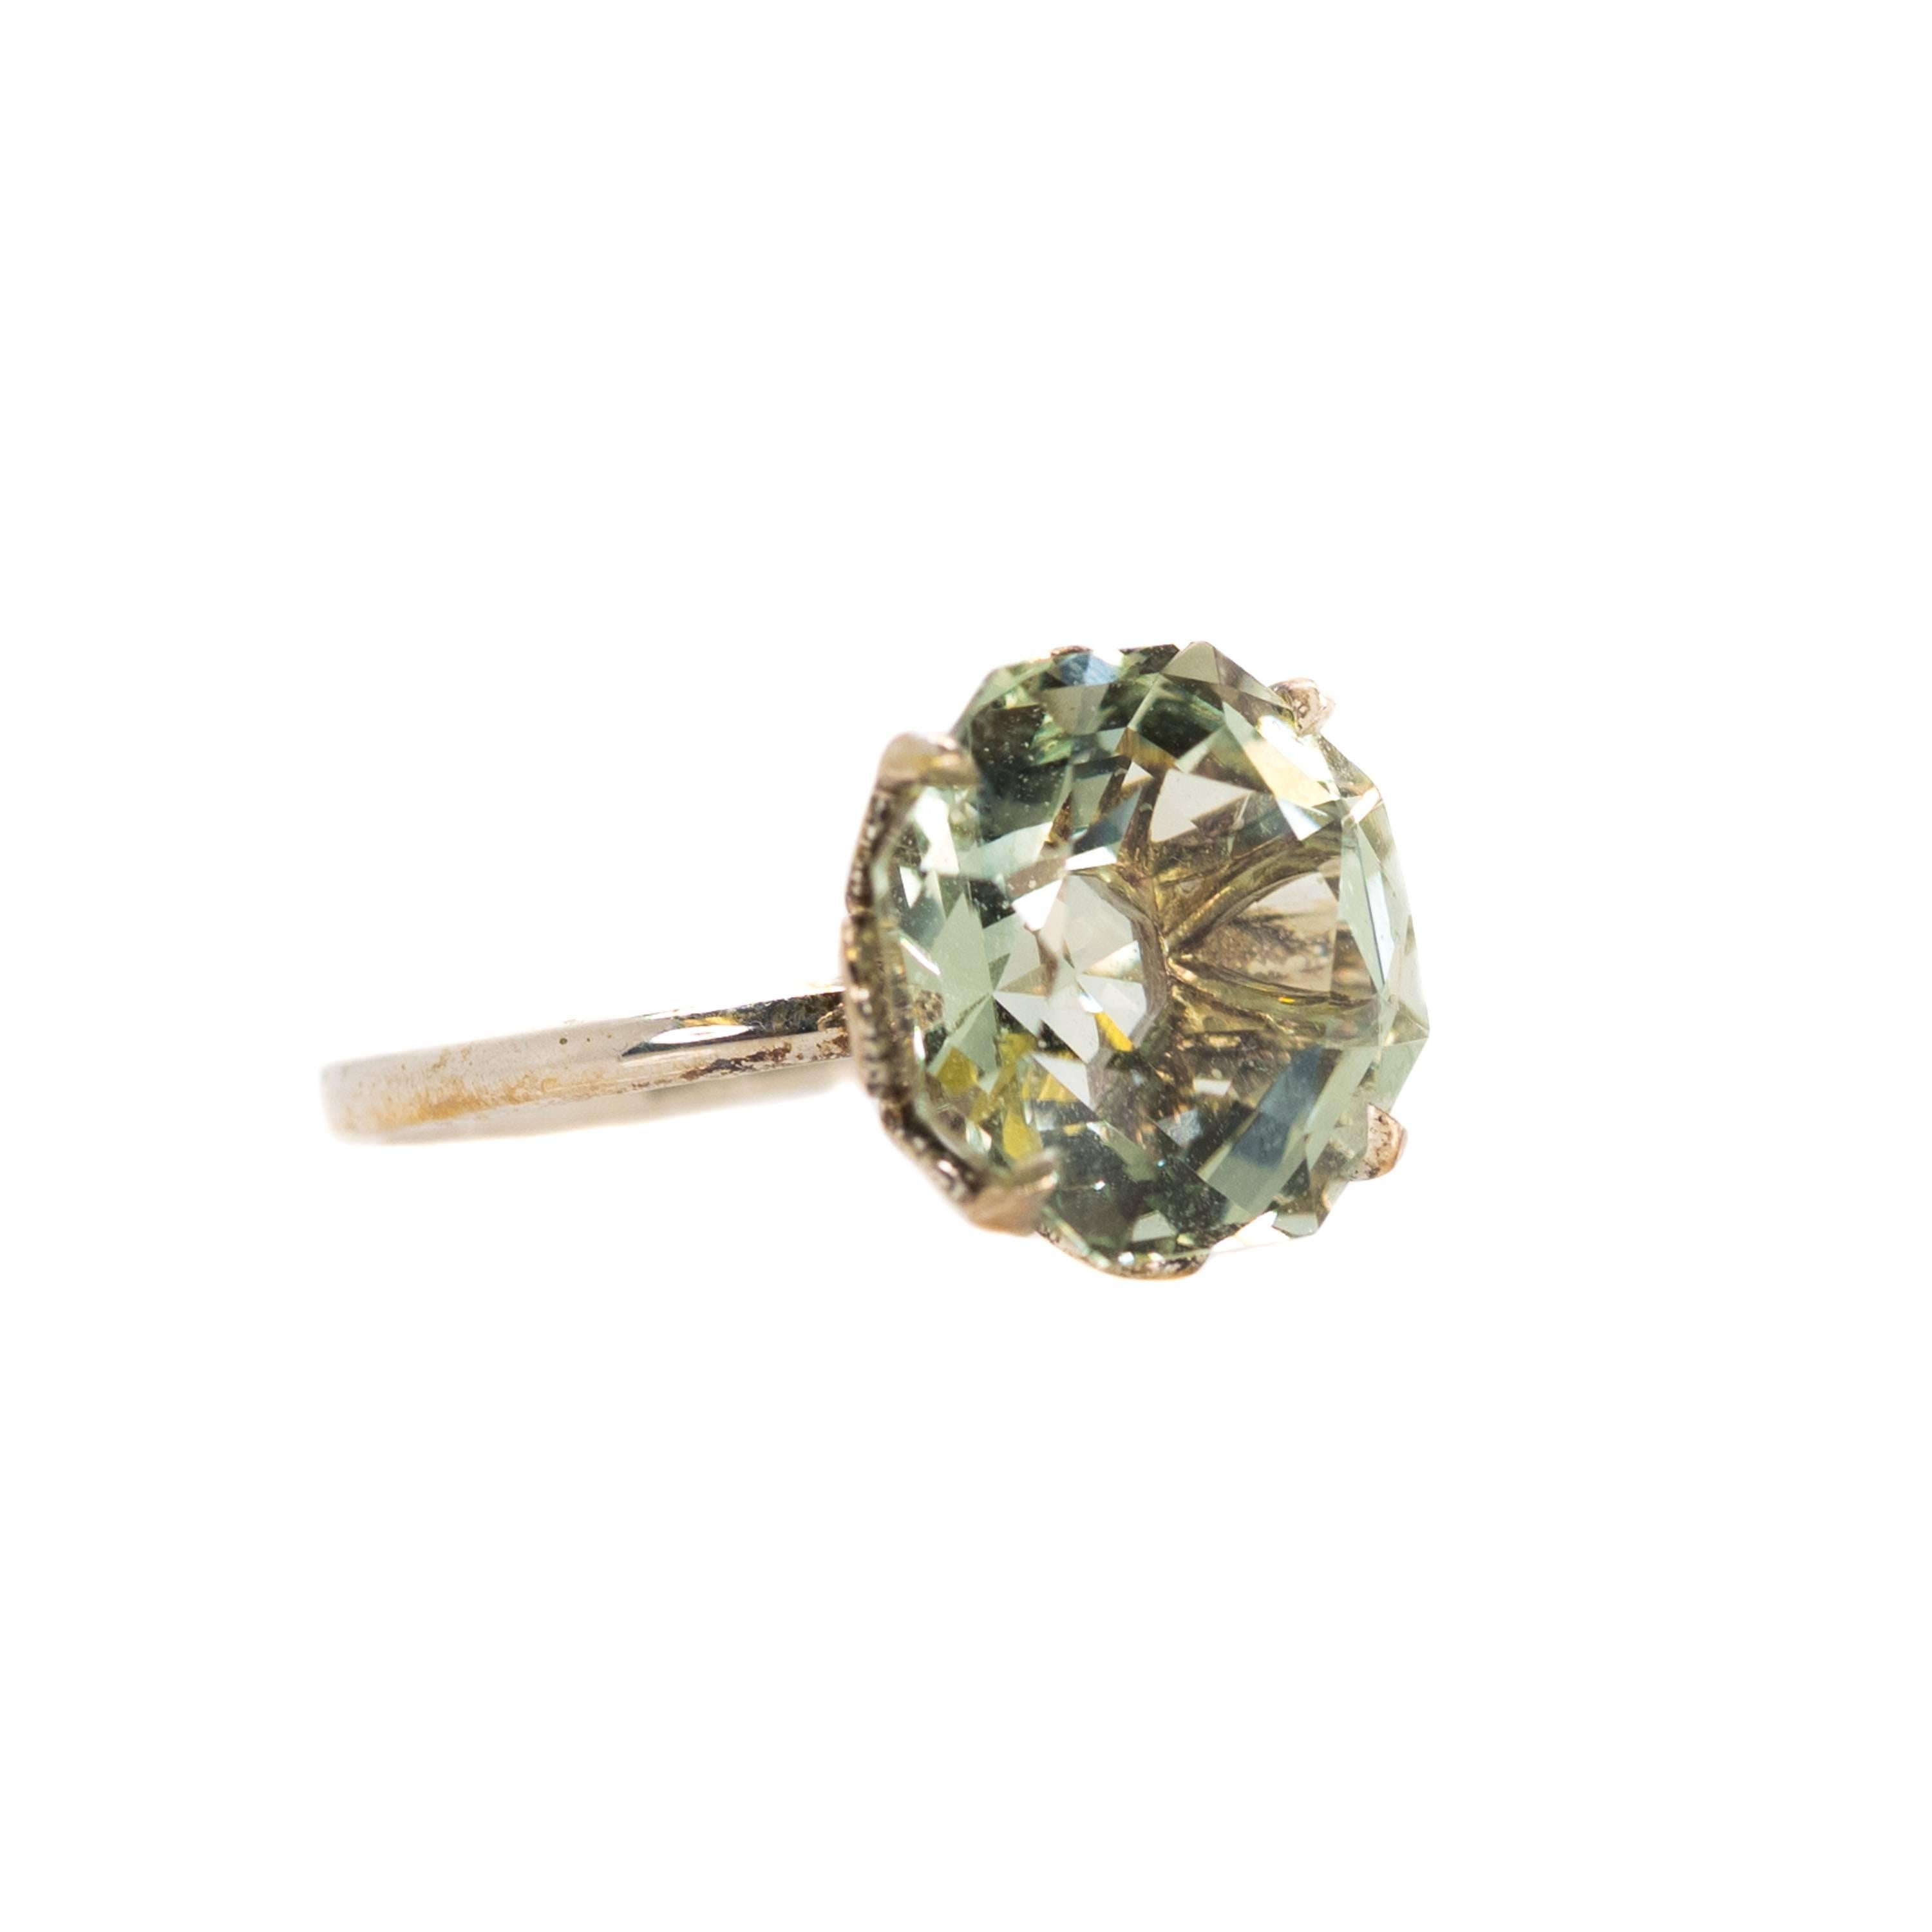 Tiffany and Co. 3.0 carat Octagon, Brilliant cut Prasiolite Ring - Sterling Silver, Prasiolite

Features a 3.0 carat very clear, pale green Prasiolite securely set with 4 prongs. This sparkling gemstone has light aqua blue and pale yellow hues and